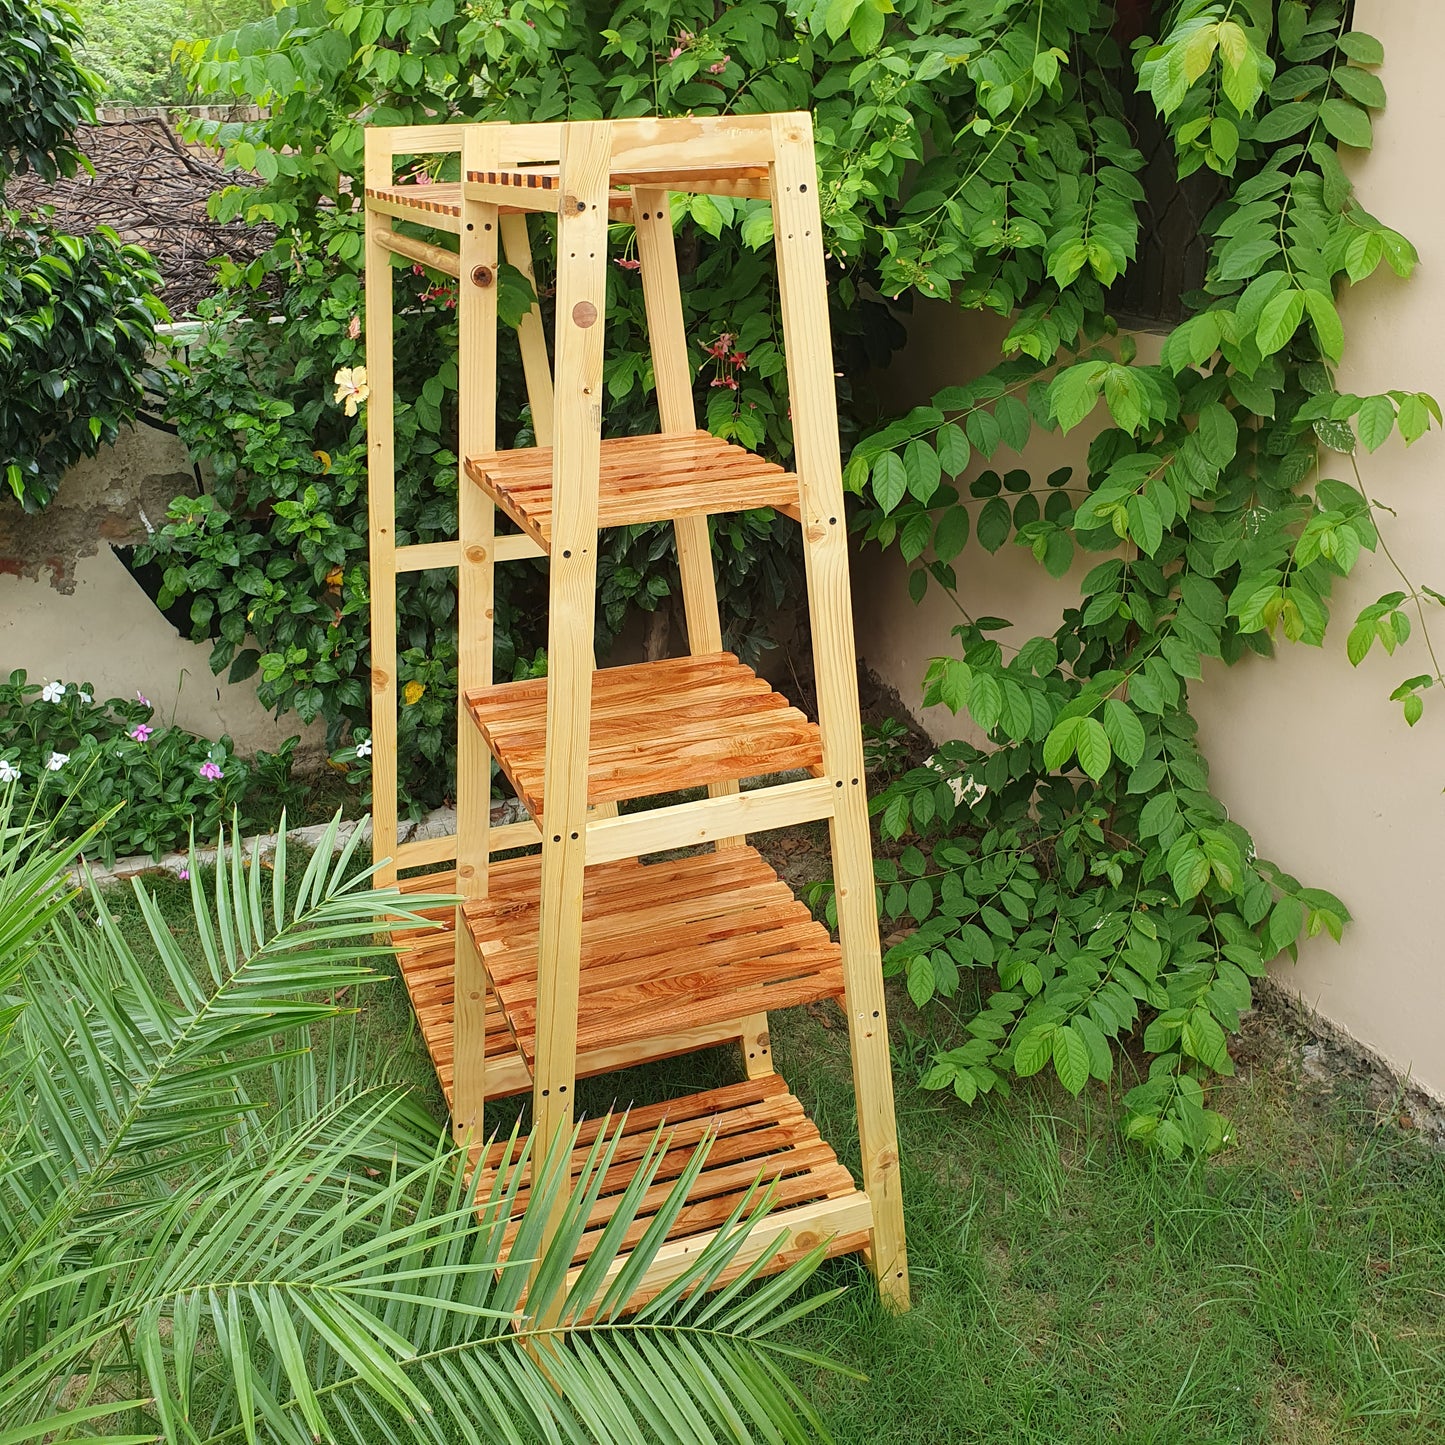 Wooden Cloth Stand